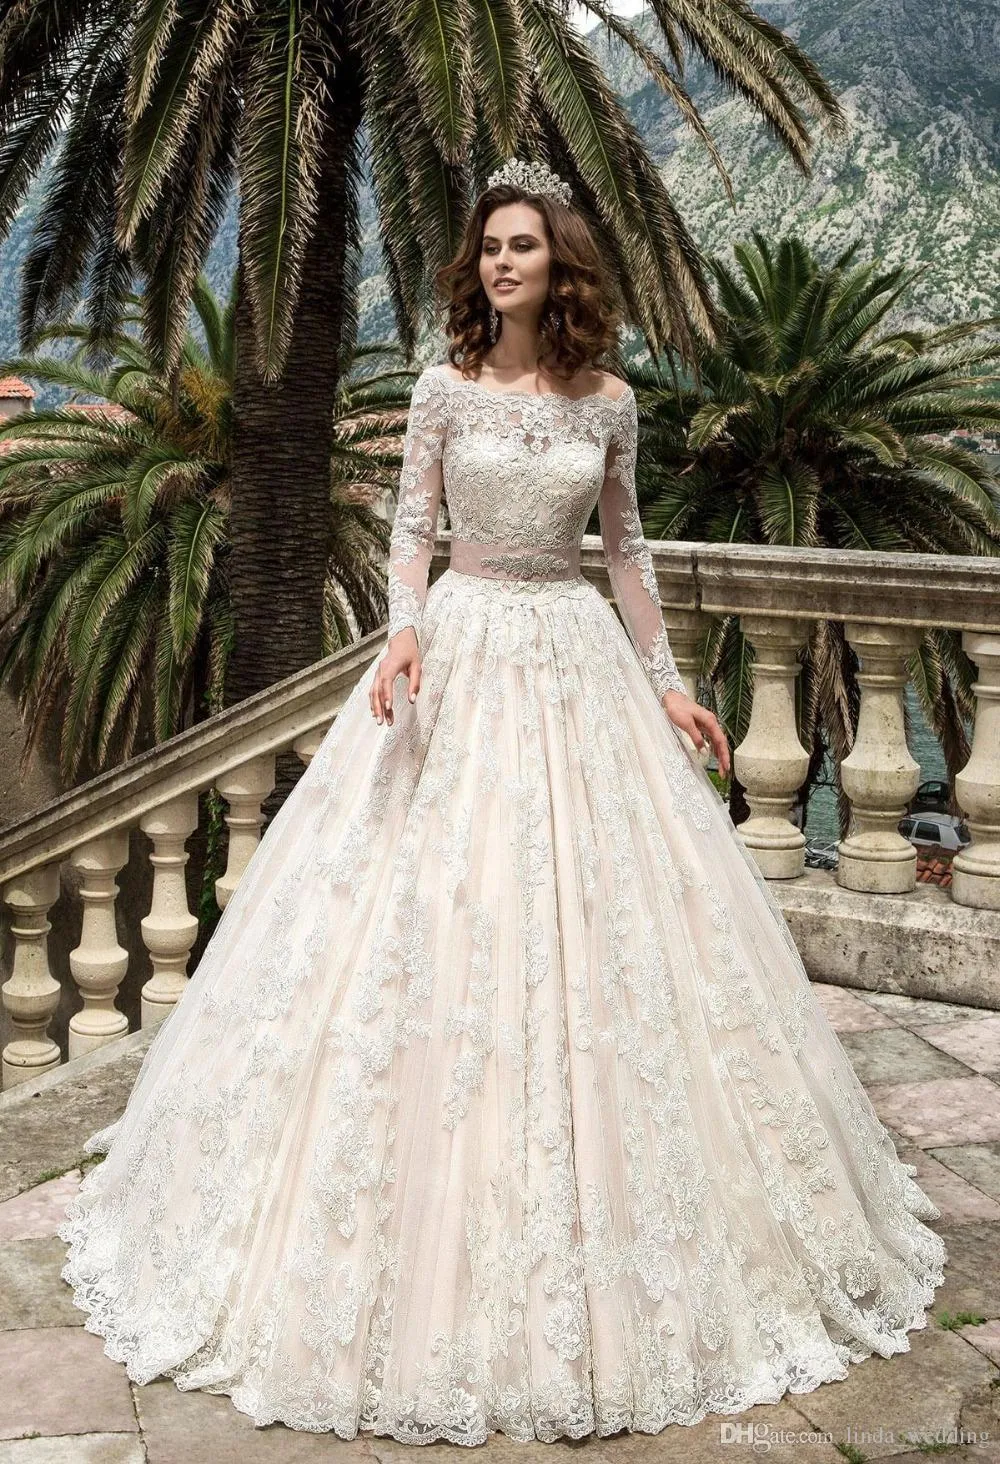 2019 Stunning Full Sleeves Lace Ball Gown Wedding Dress Vintage Bridal ...